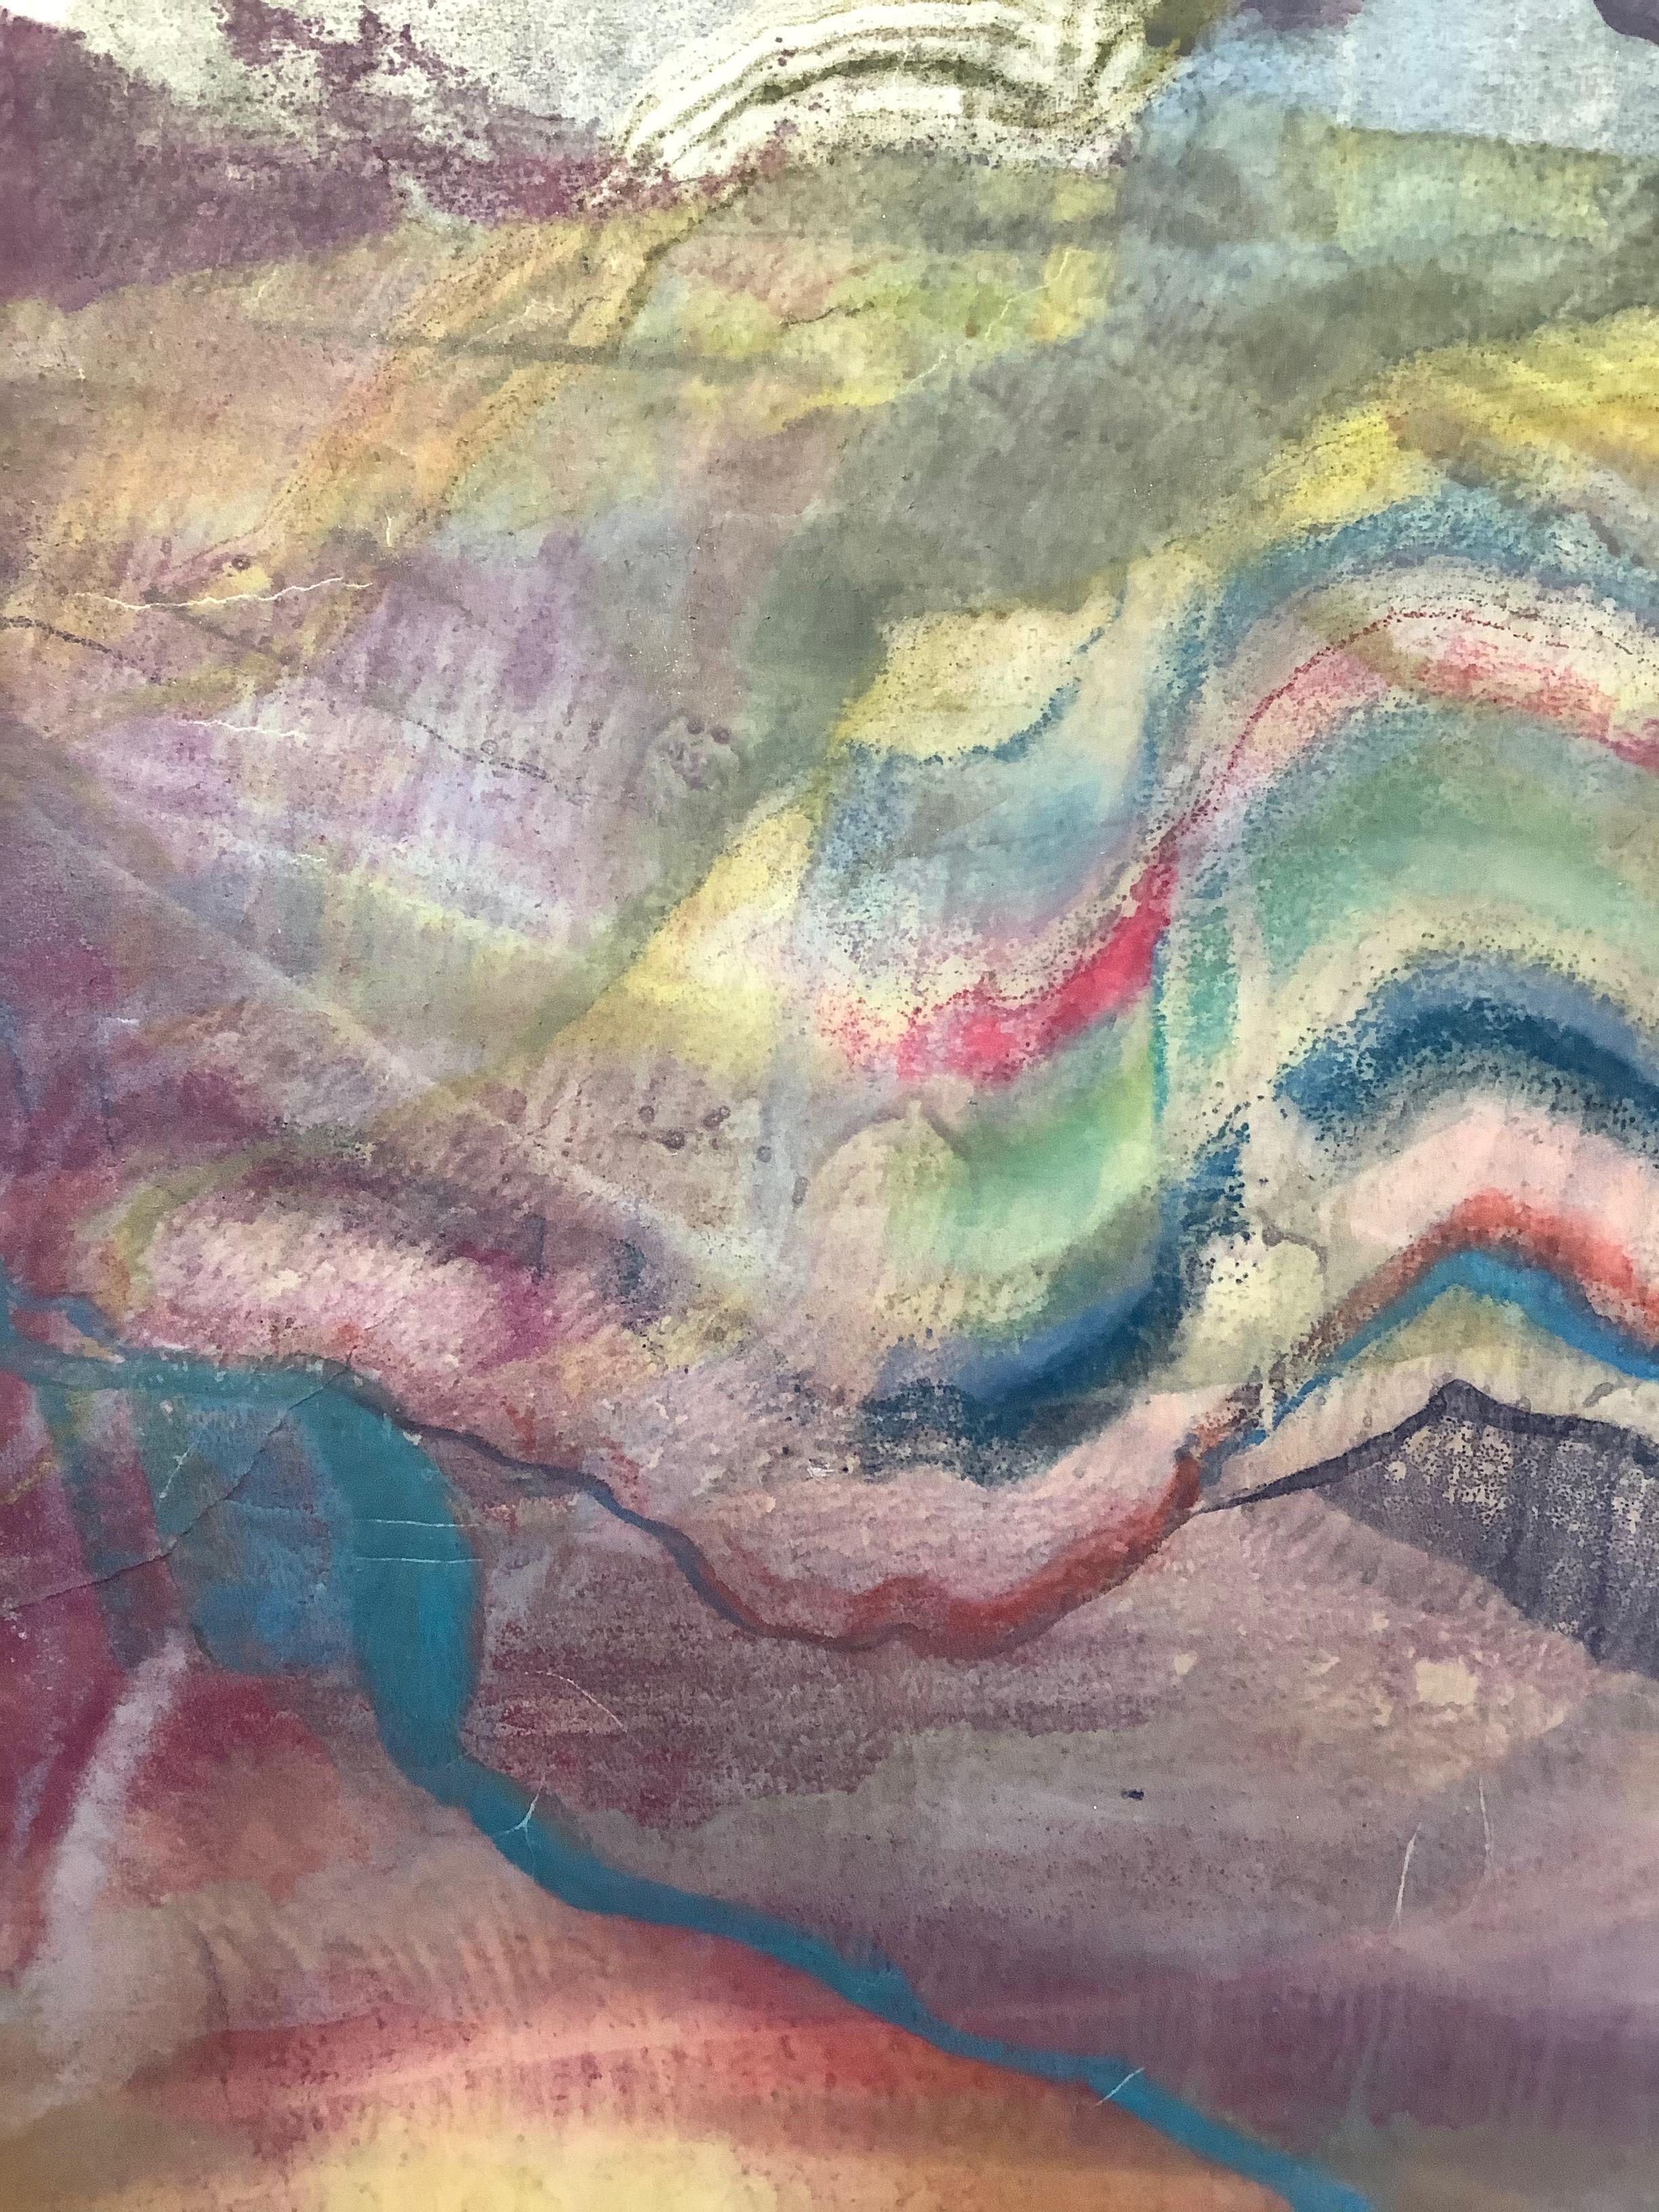 Conquering the Stars is an abstract, multicolored encaustic monotype on paper. Layers of pigmented beeswax on lightweight Japanese kawashi paper create an undulating composition in bright shades of blue and yellow, and deep red and purple with brown